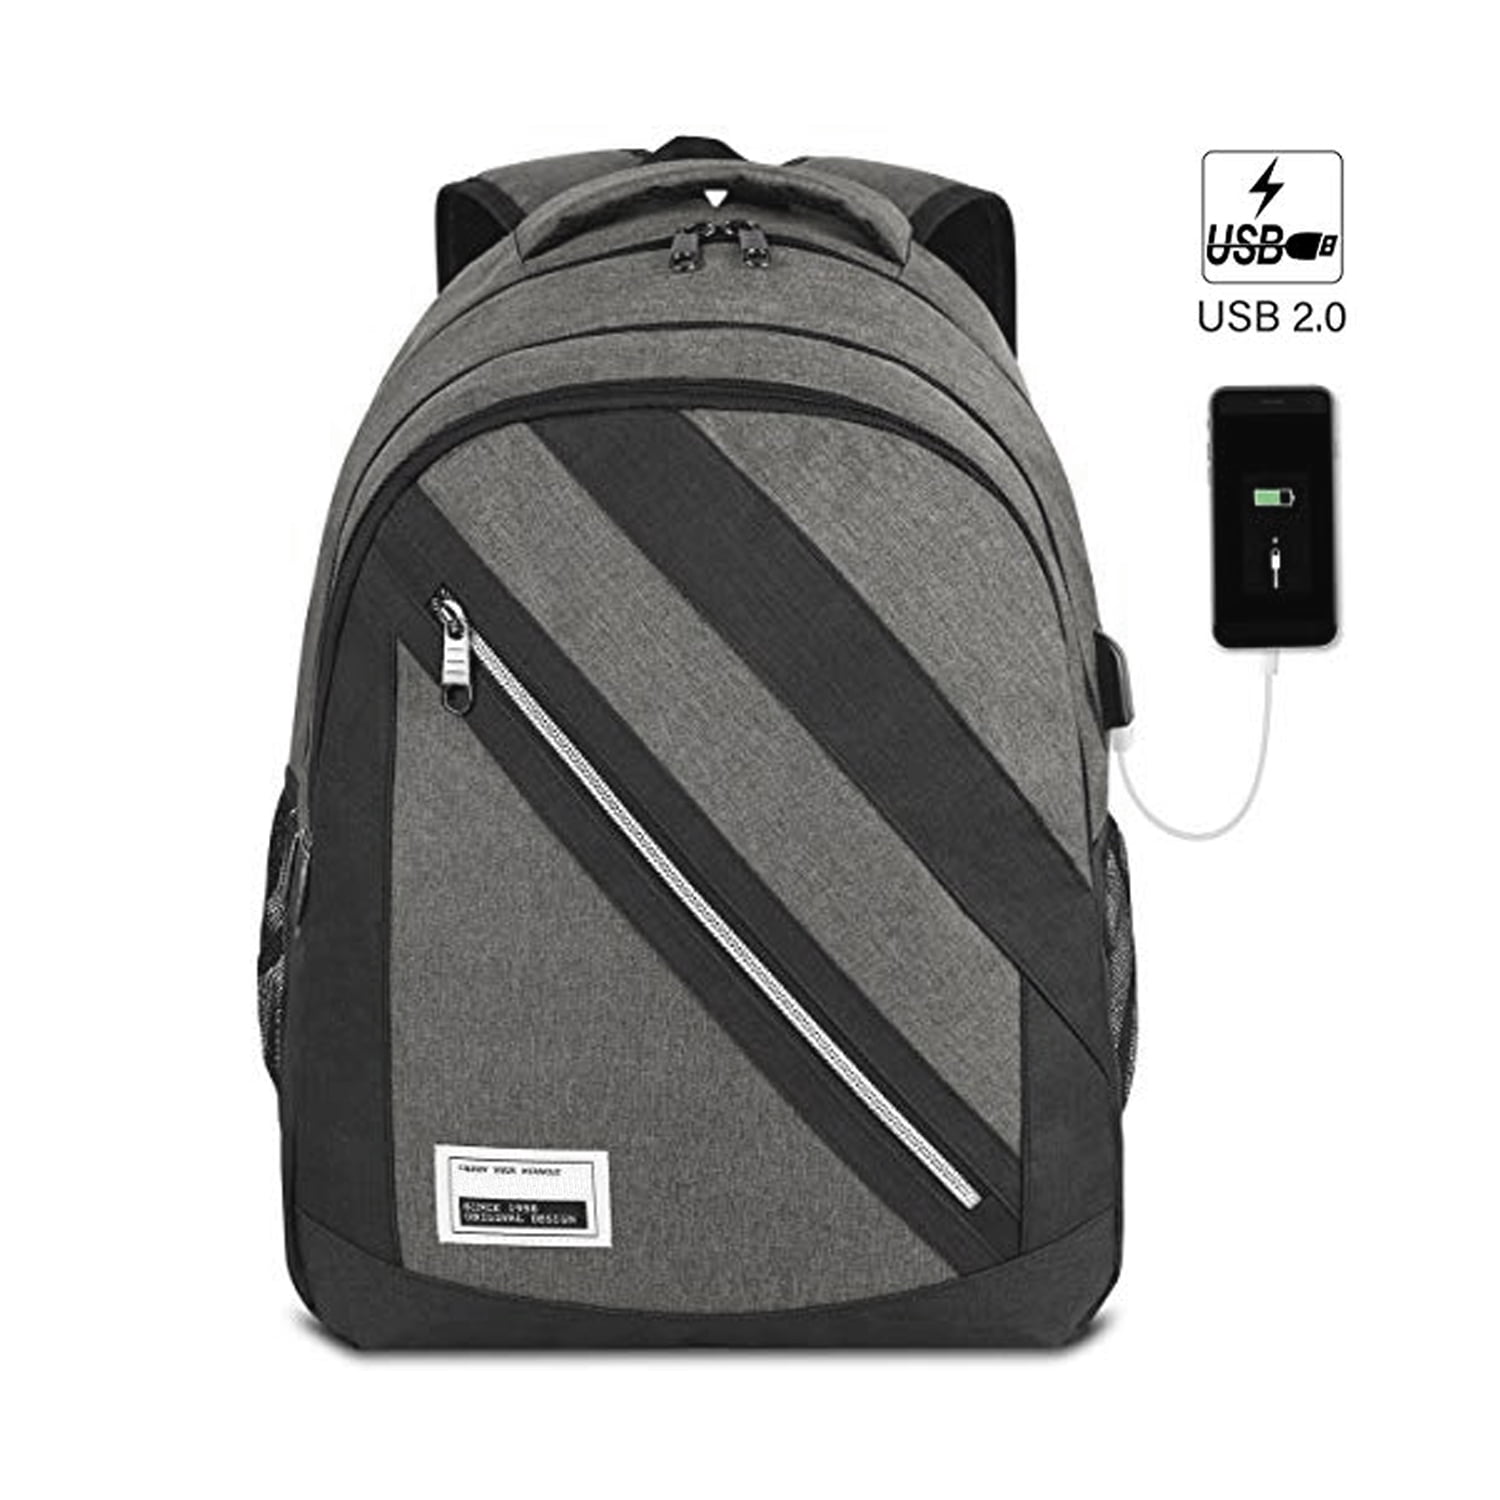 YAMTION Laptop Backpack 17 Inch,Backpack Men and Women,School Backpack Teenagers,Computer Backpack with USB Charging Port,College Backpack Daypack for Boys and Girls